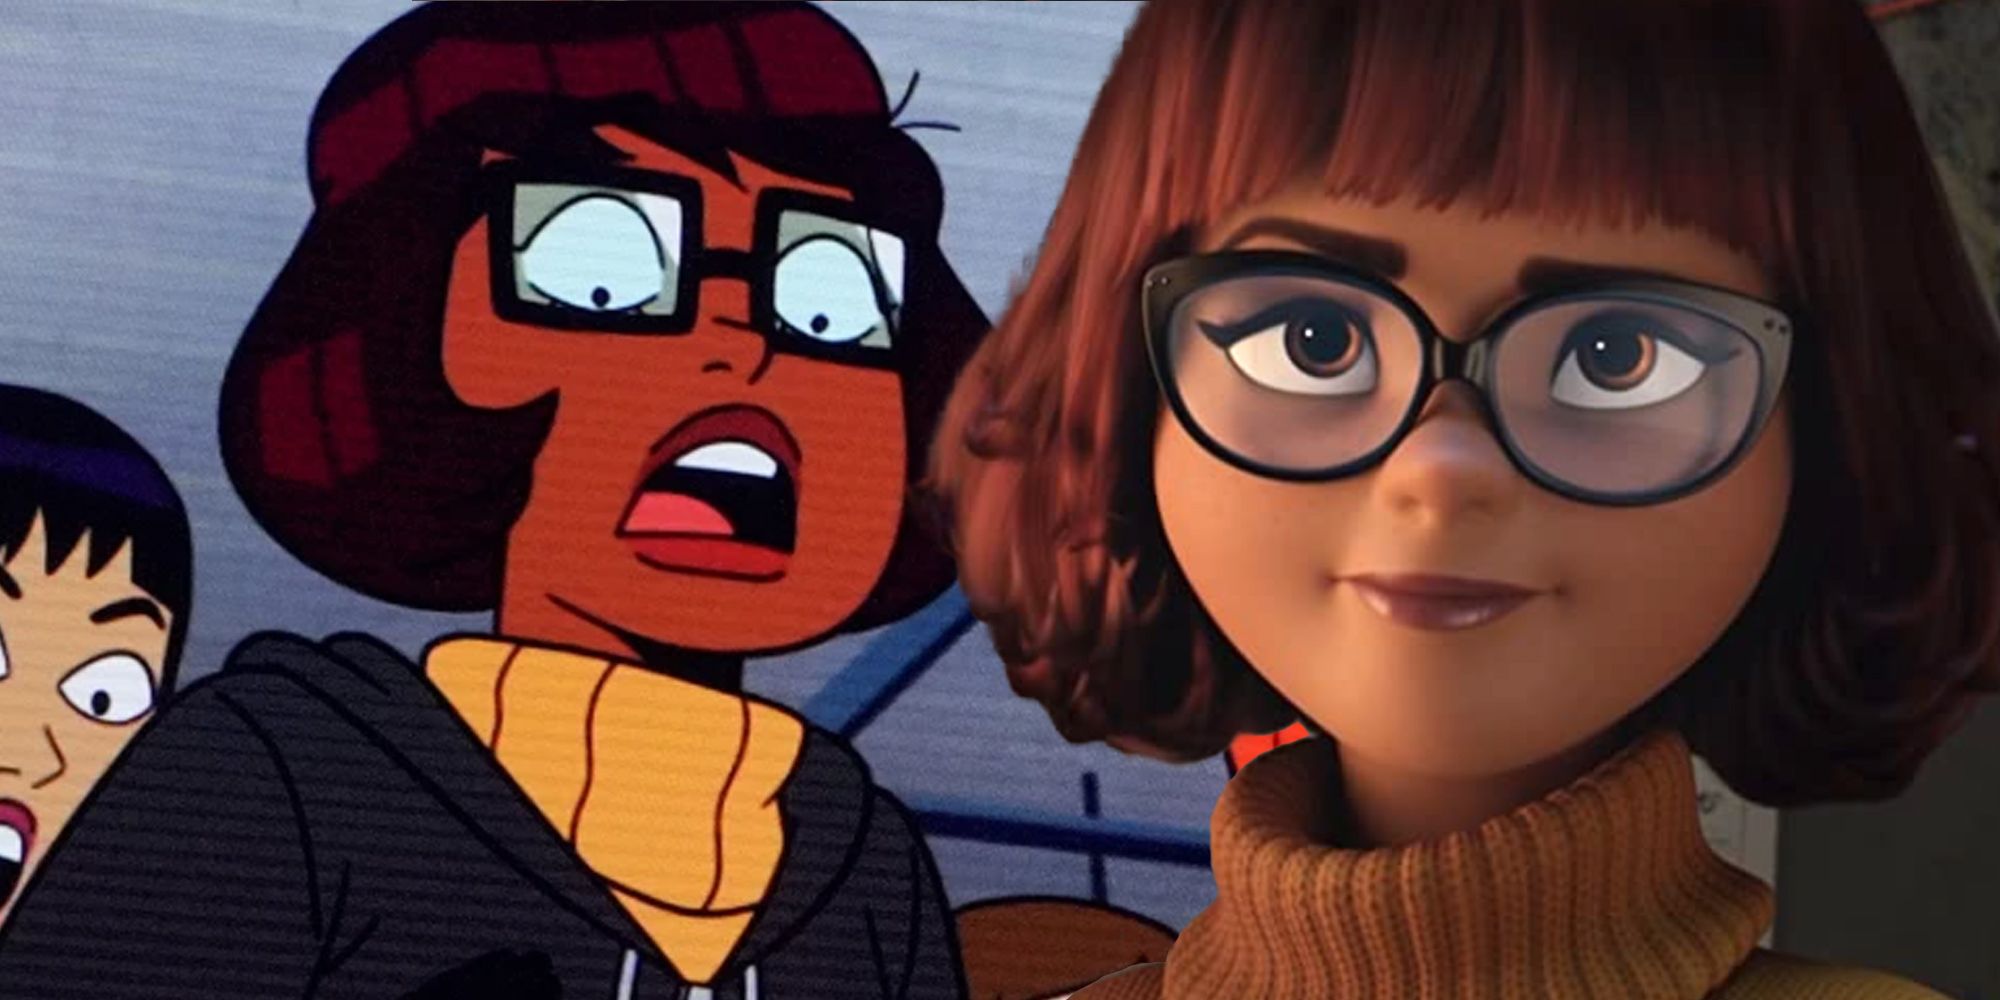 Velma Trailer & Images Reveal Redesigned ScoobyDoo Mystery Inc Characters